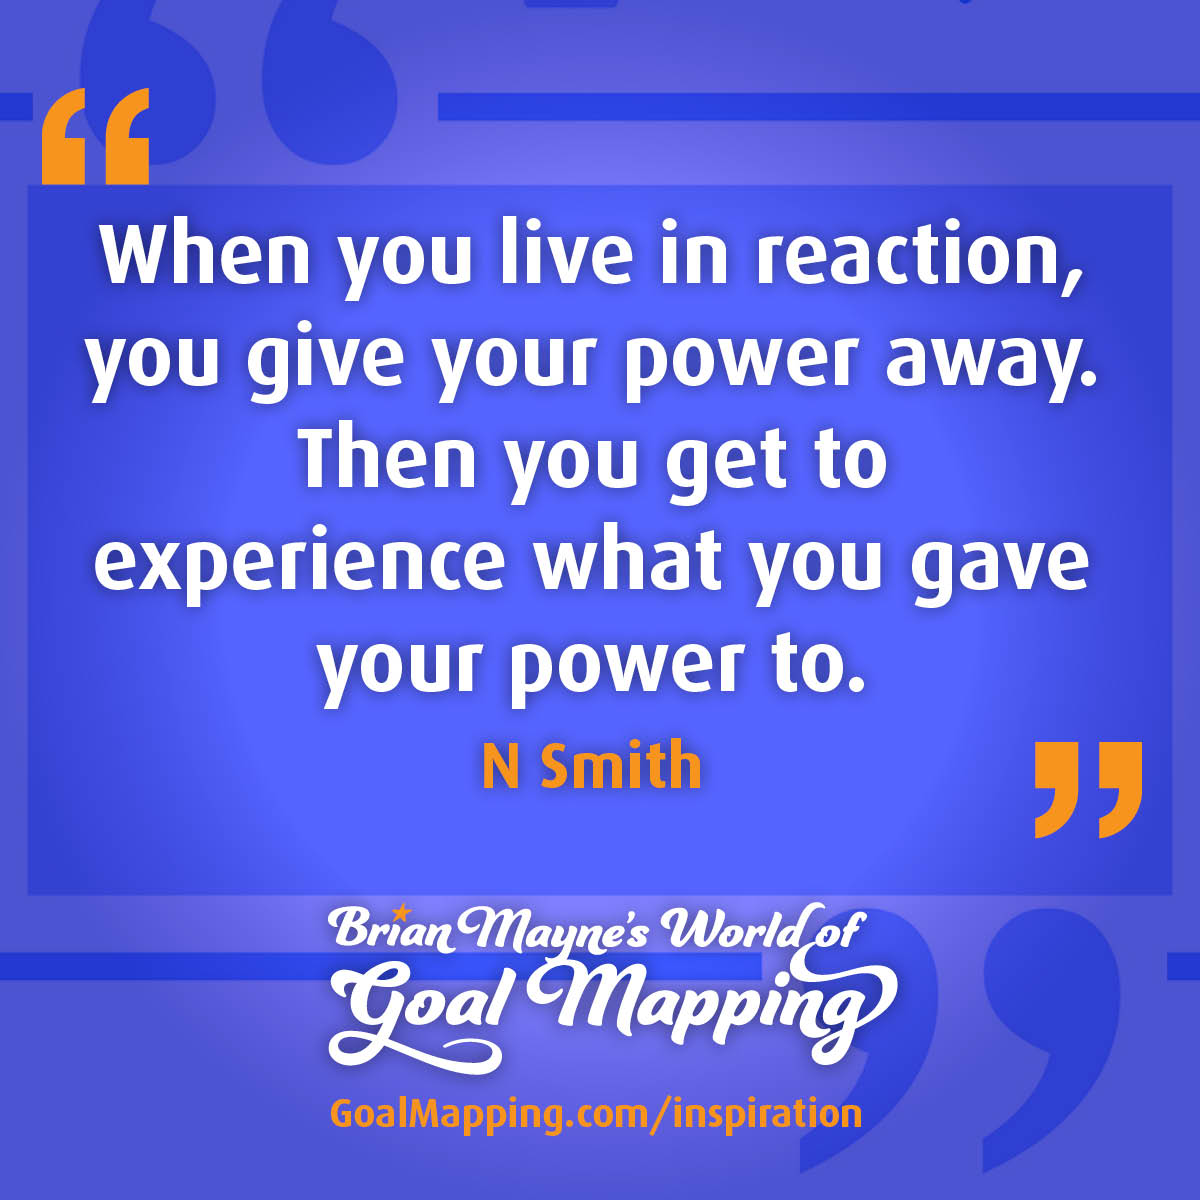 "When you live in reaction, you give your power away. Then you get to experience what you gave your power to." N Smith